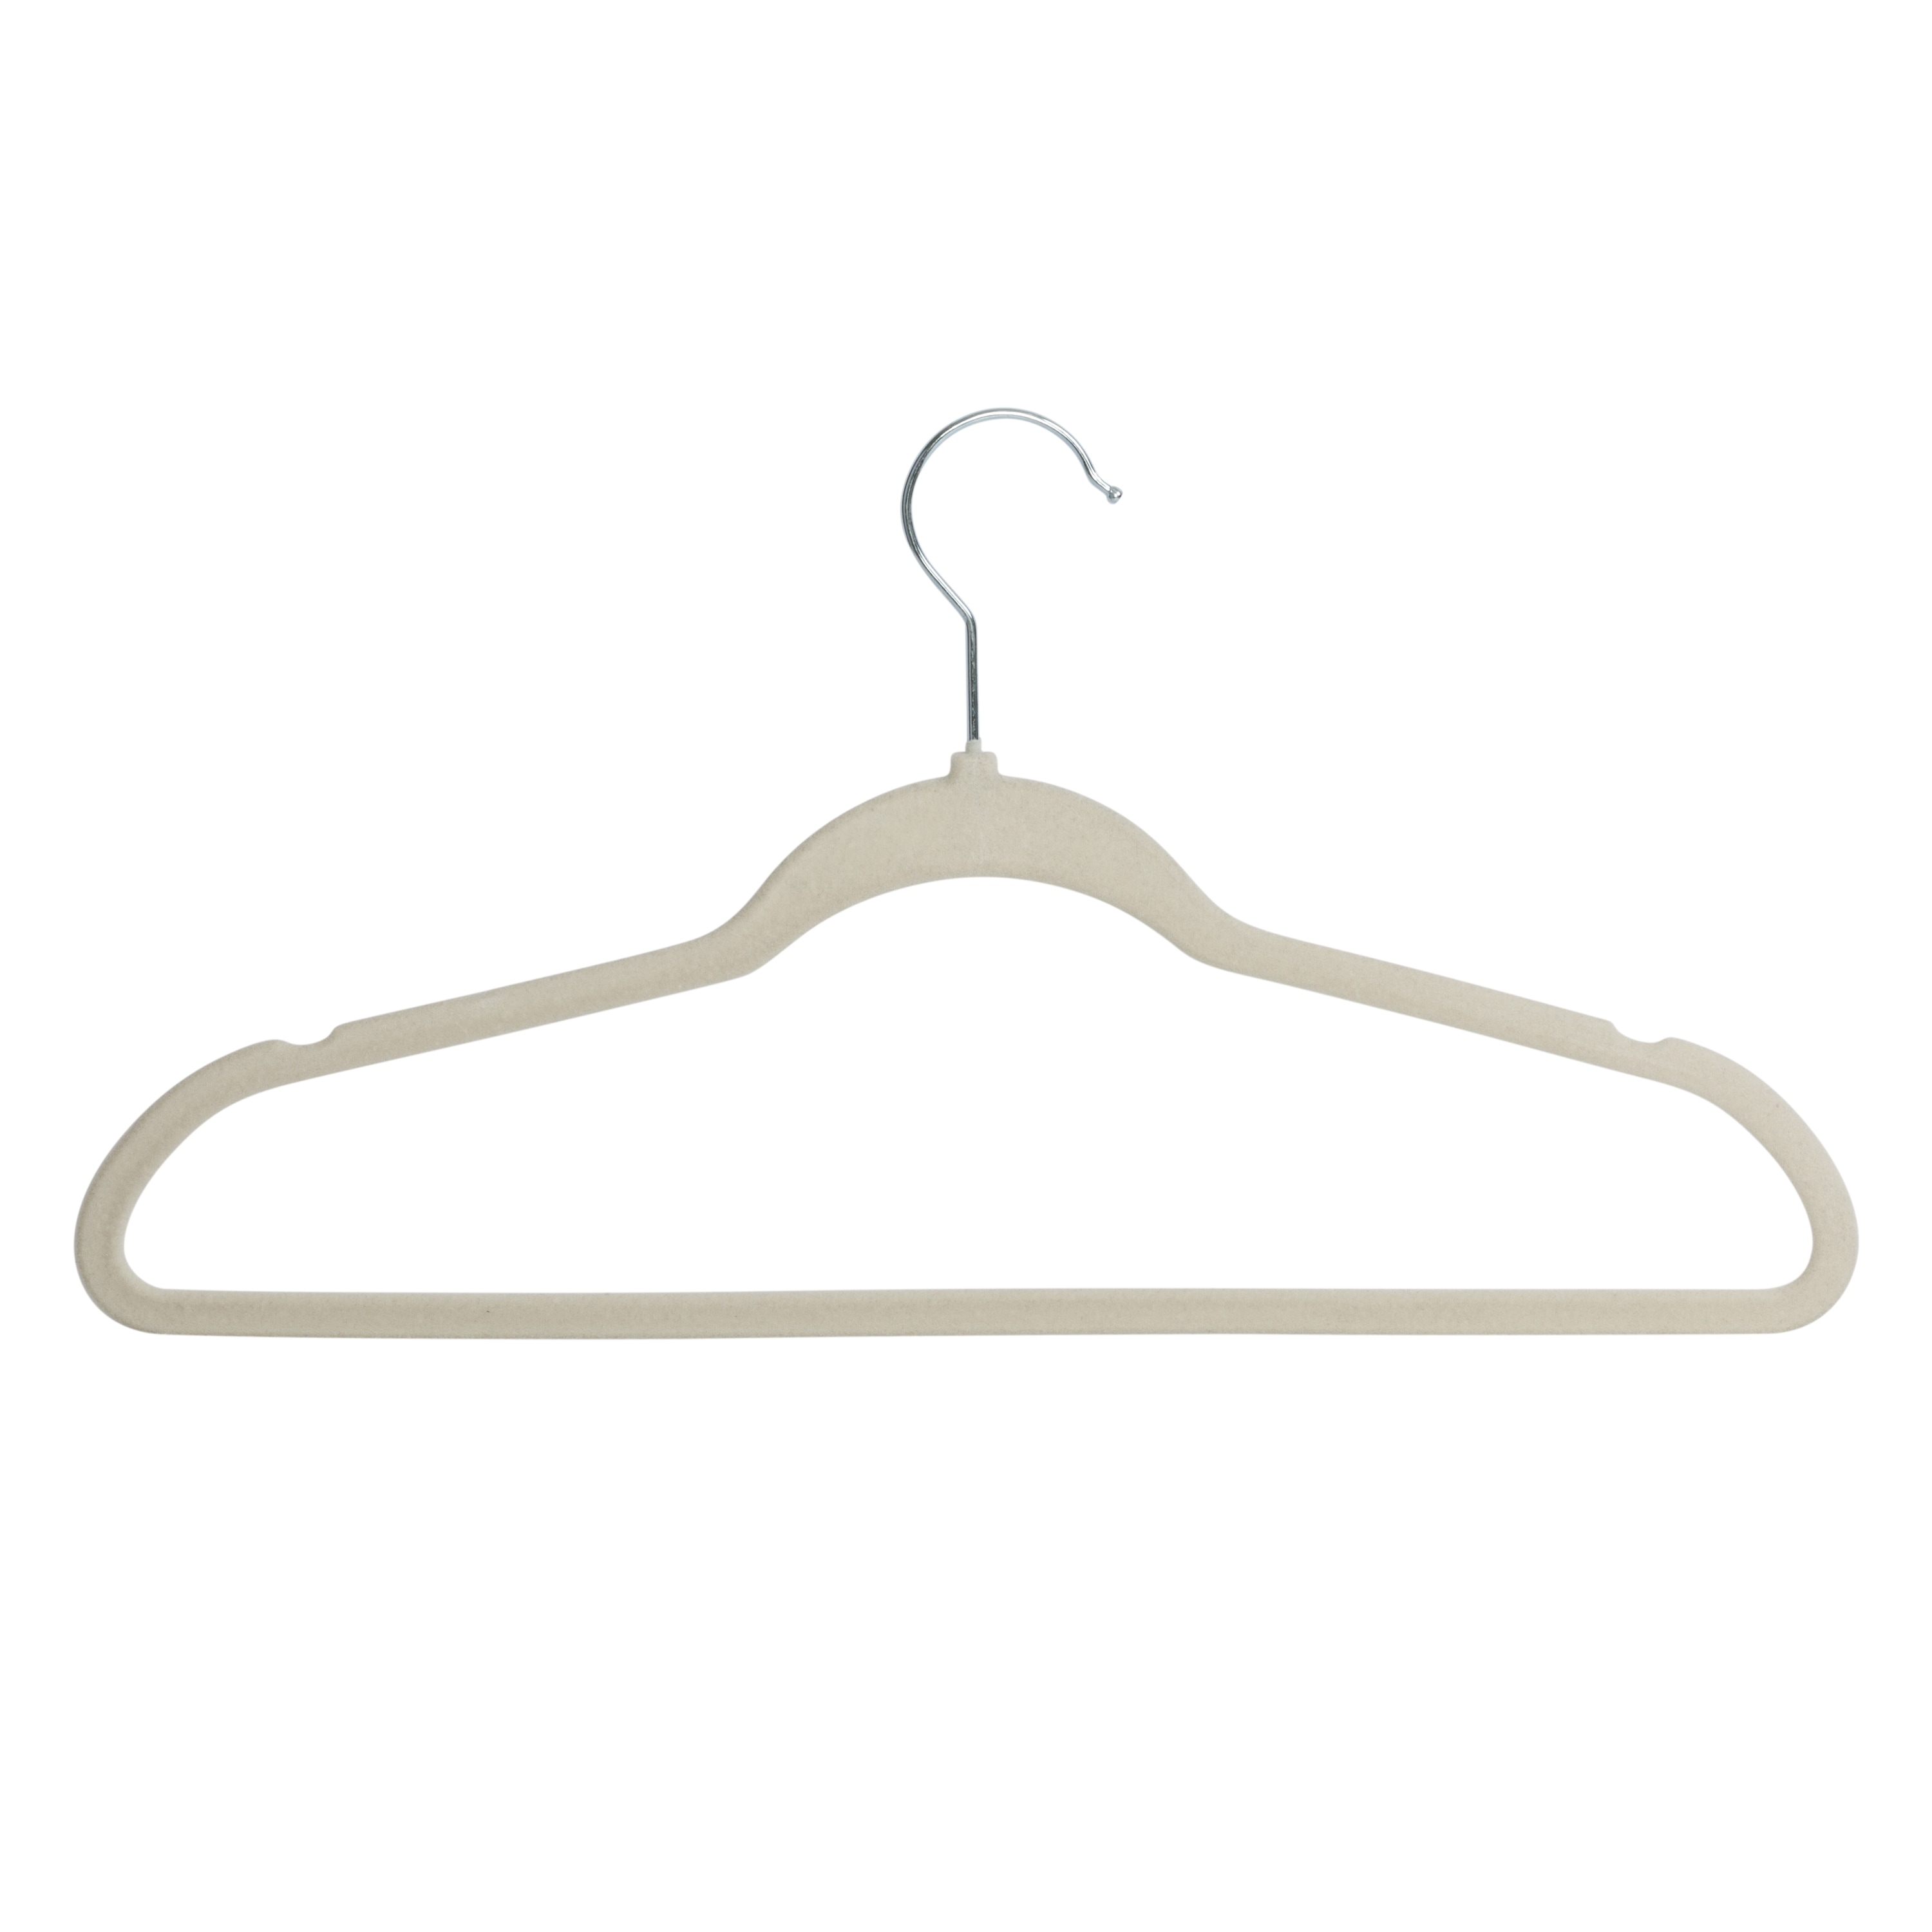 https://ak1.ostkcdn.com/images/products/is/images/direct/503cc40db84fde4dbefd1e706cf43770f040391e/Plastic-and-Velvet-Non-Slip-Hangers-%2825-Pack%29.jpg